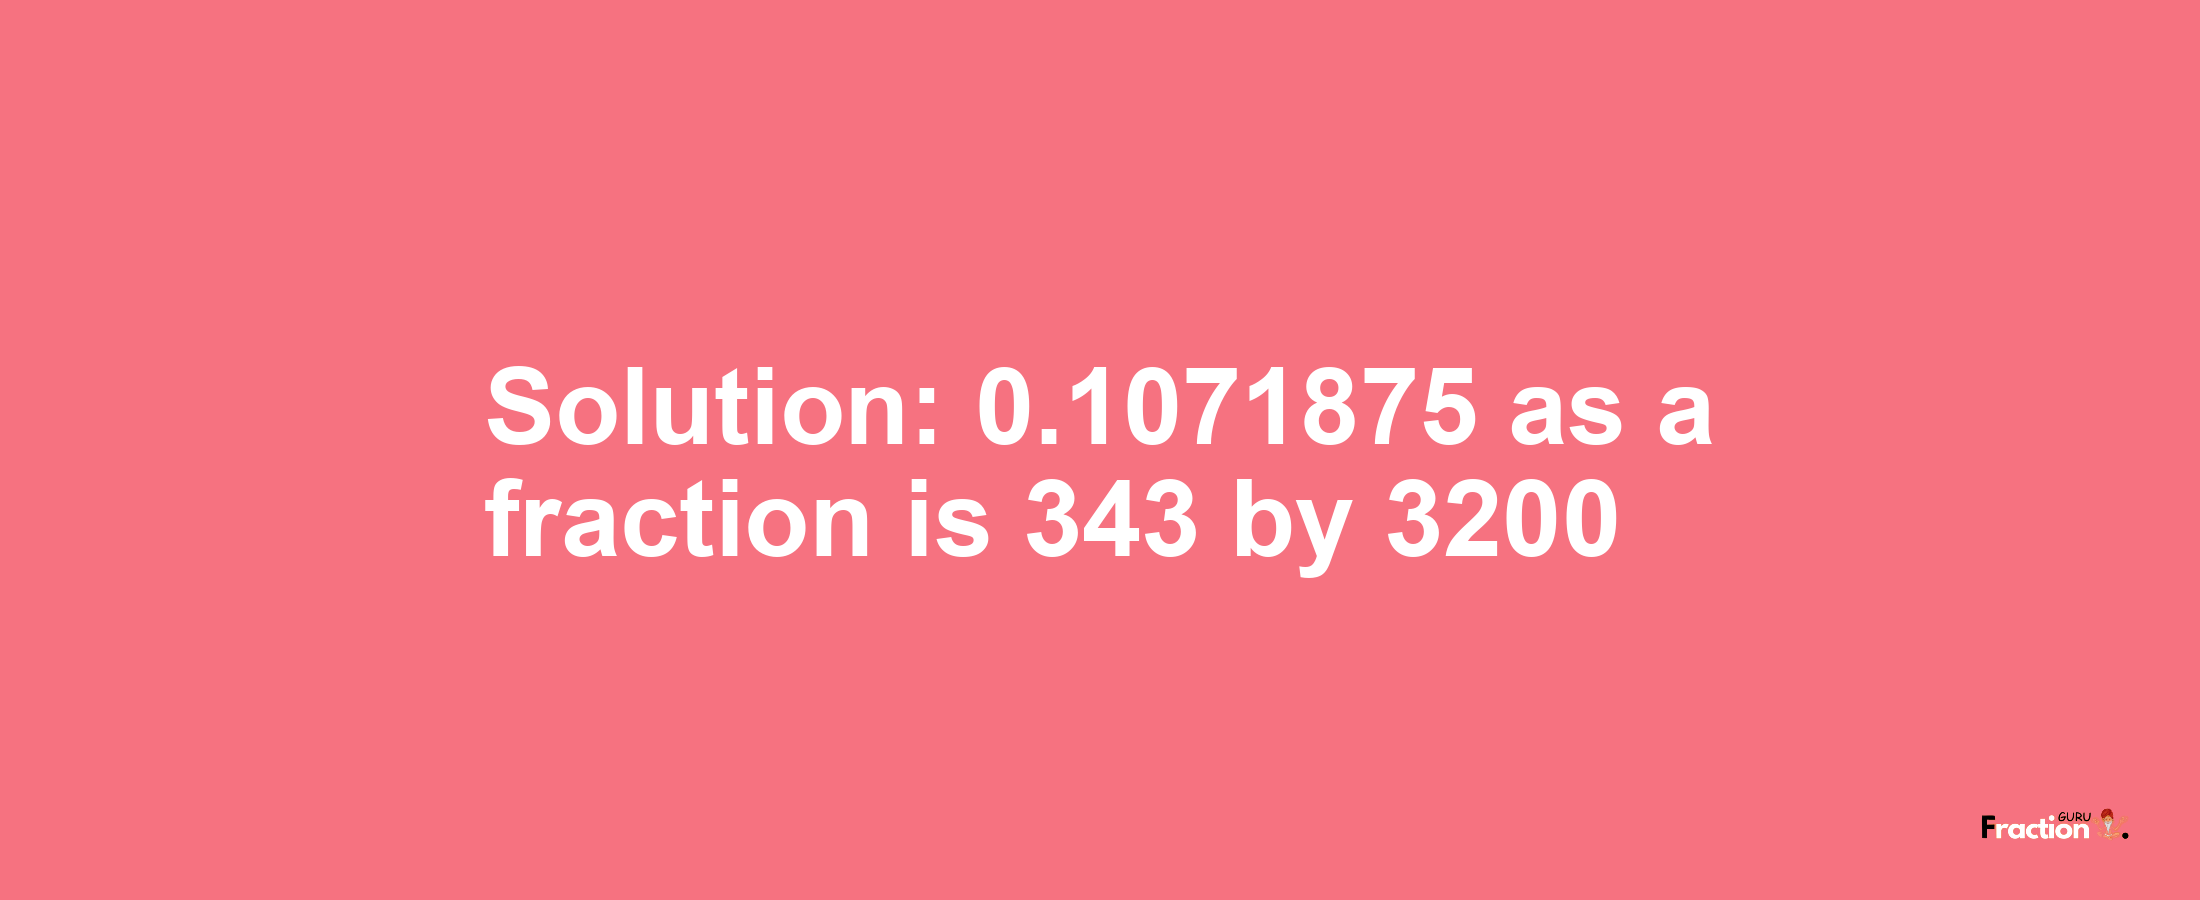 Solution:0.1071875 as a fraction is 343/3200